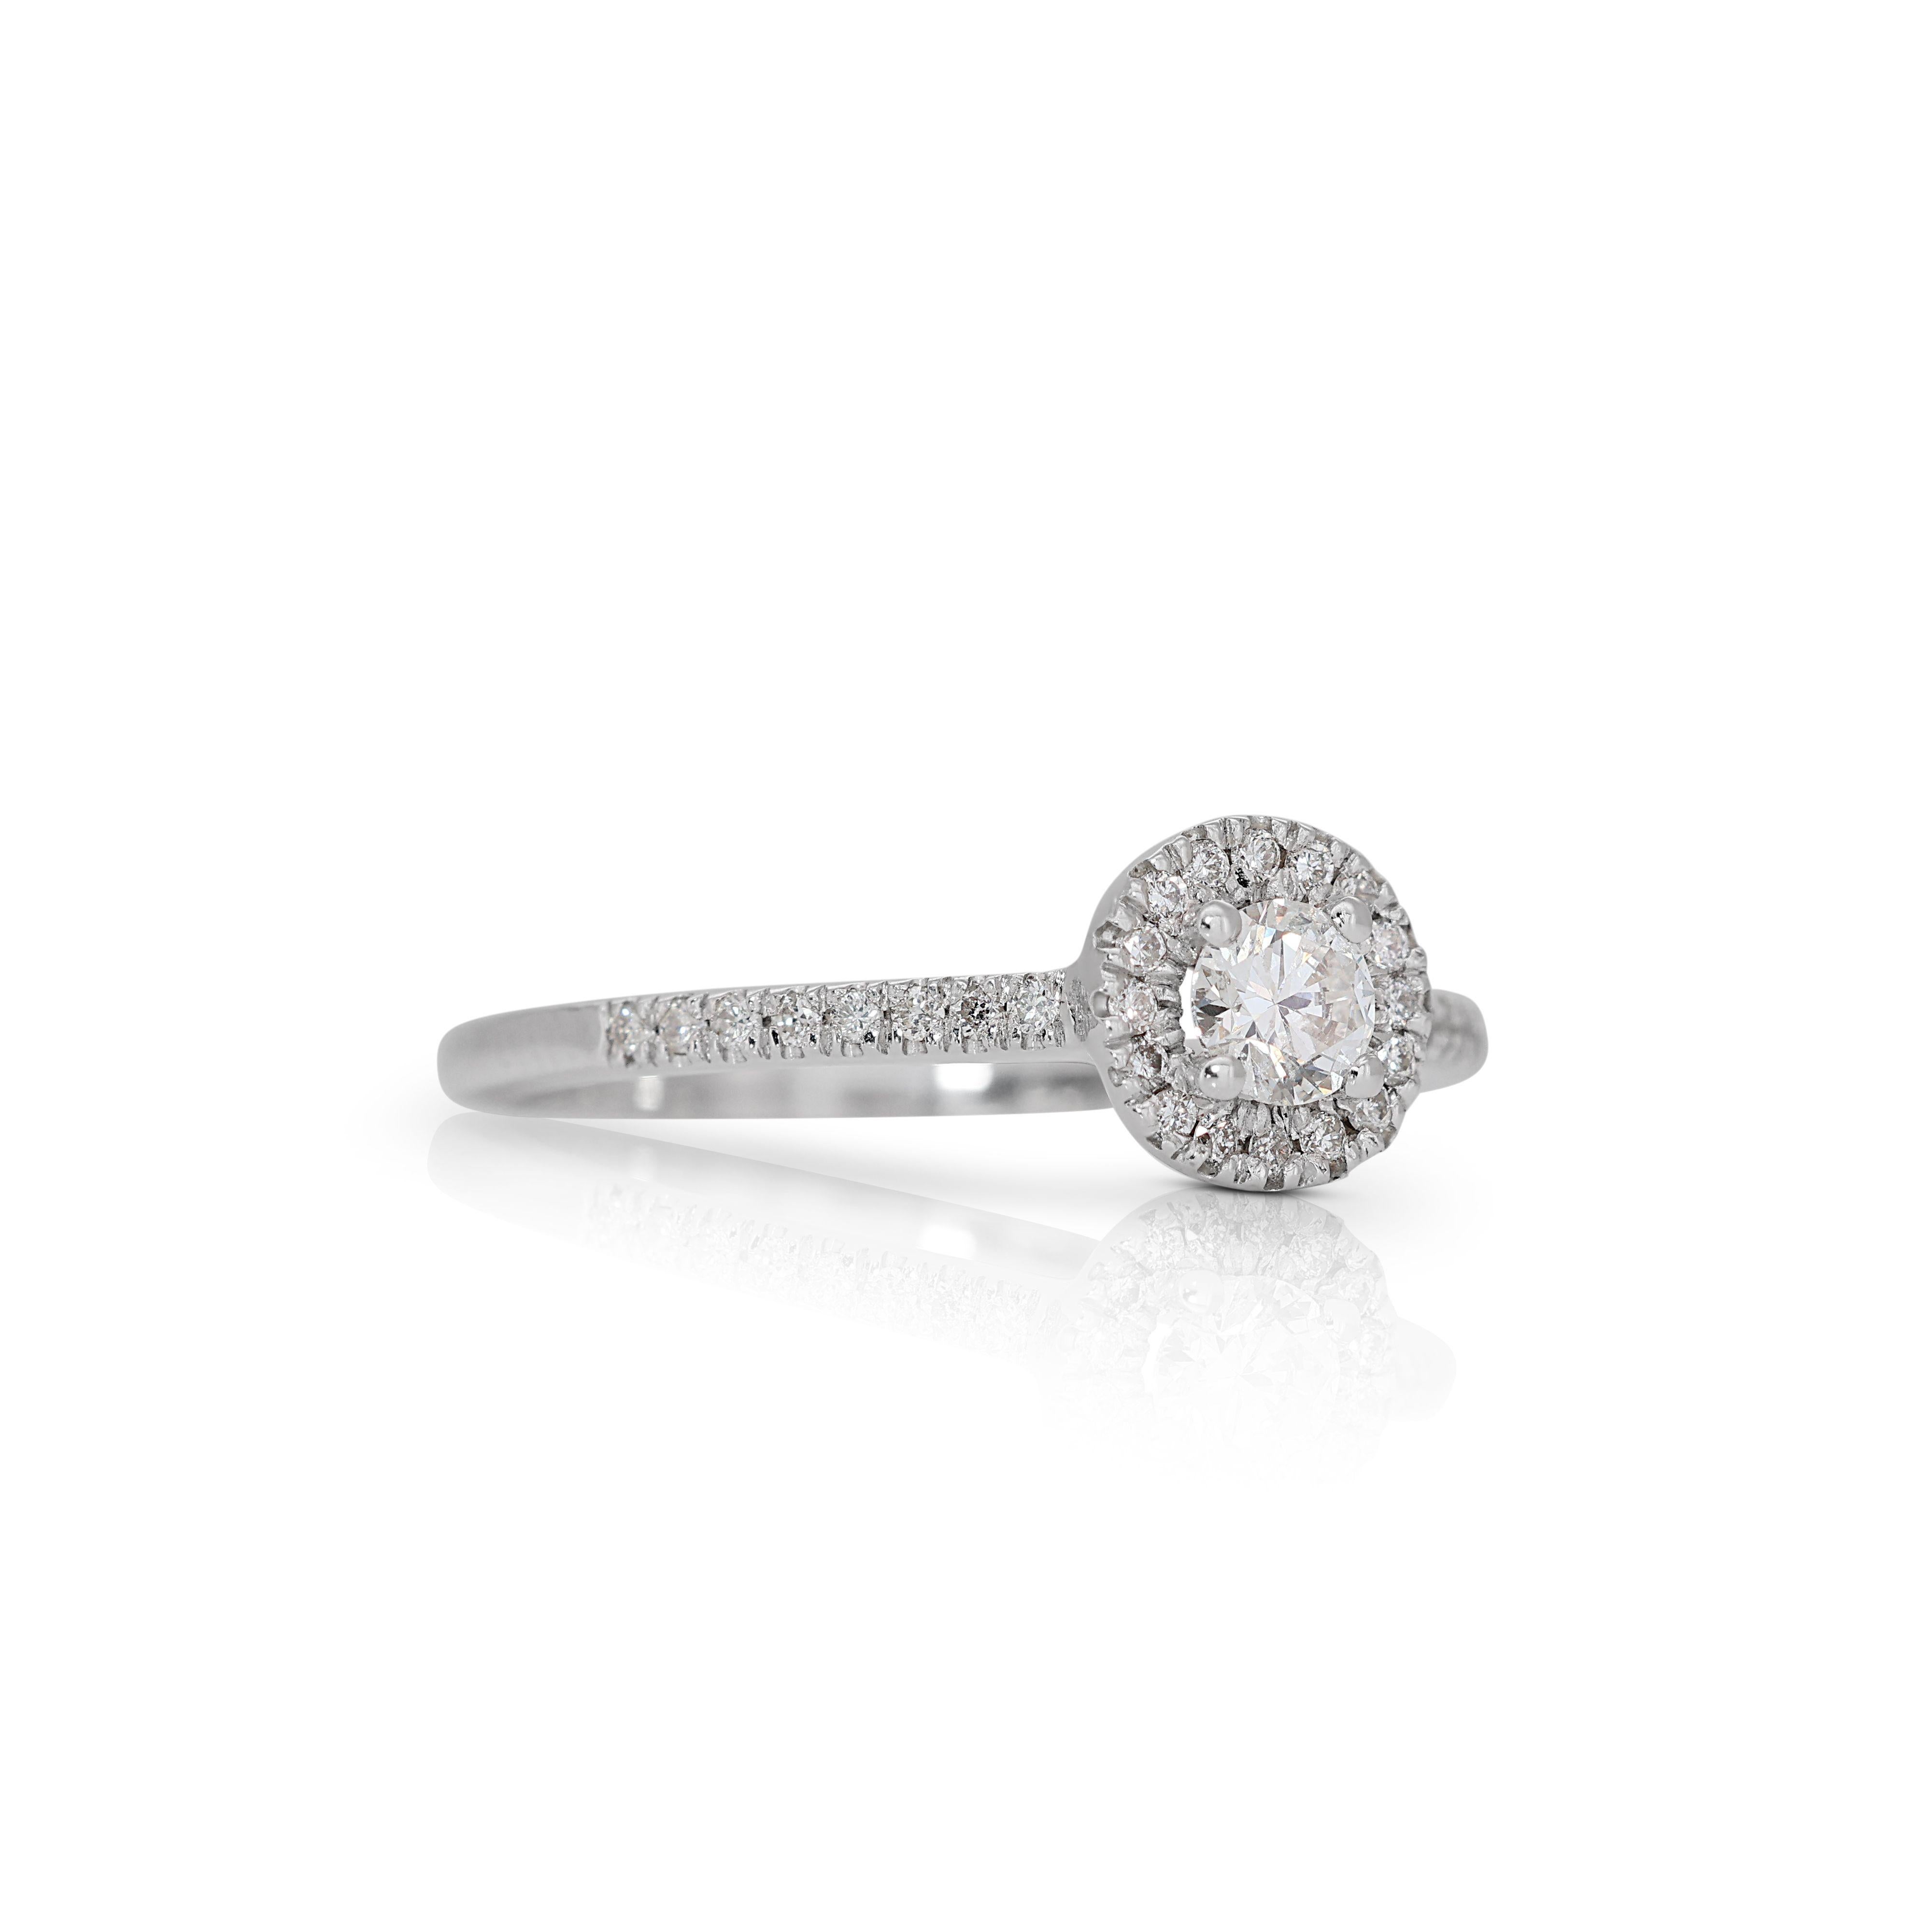 This ring is an ideal choice for those who appreciate the perfect union of classic and modern aesthetics. Whether worn as an engagement ring or as a statement piece for special occasions, the 14K White Gold Diamond Halo Pave Ring is a symbol of